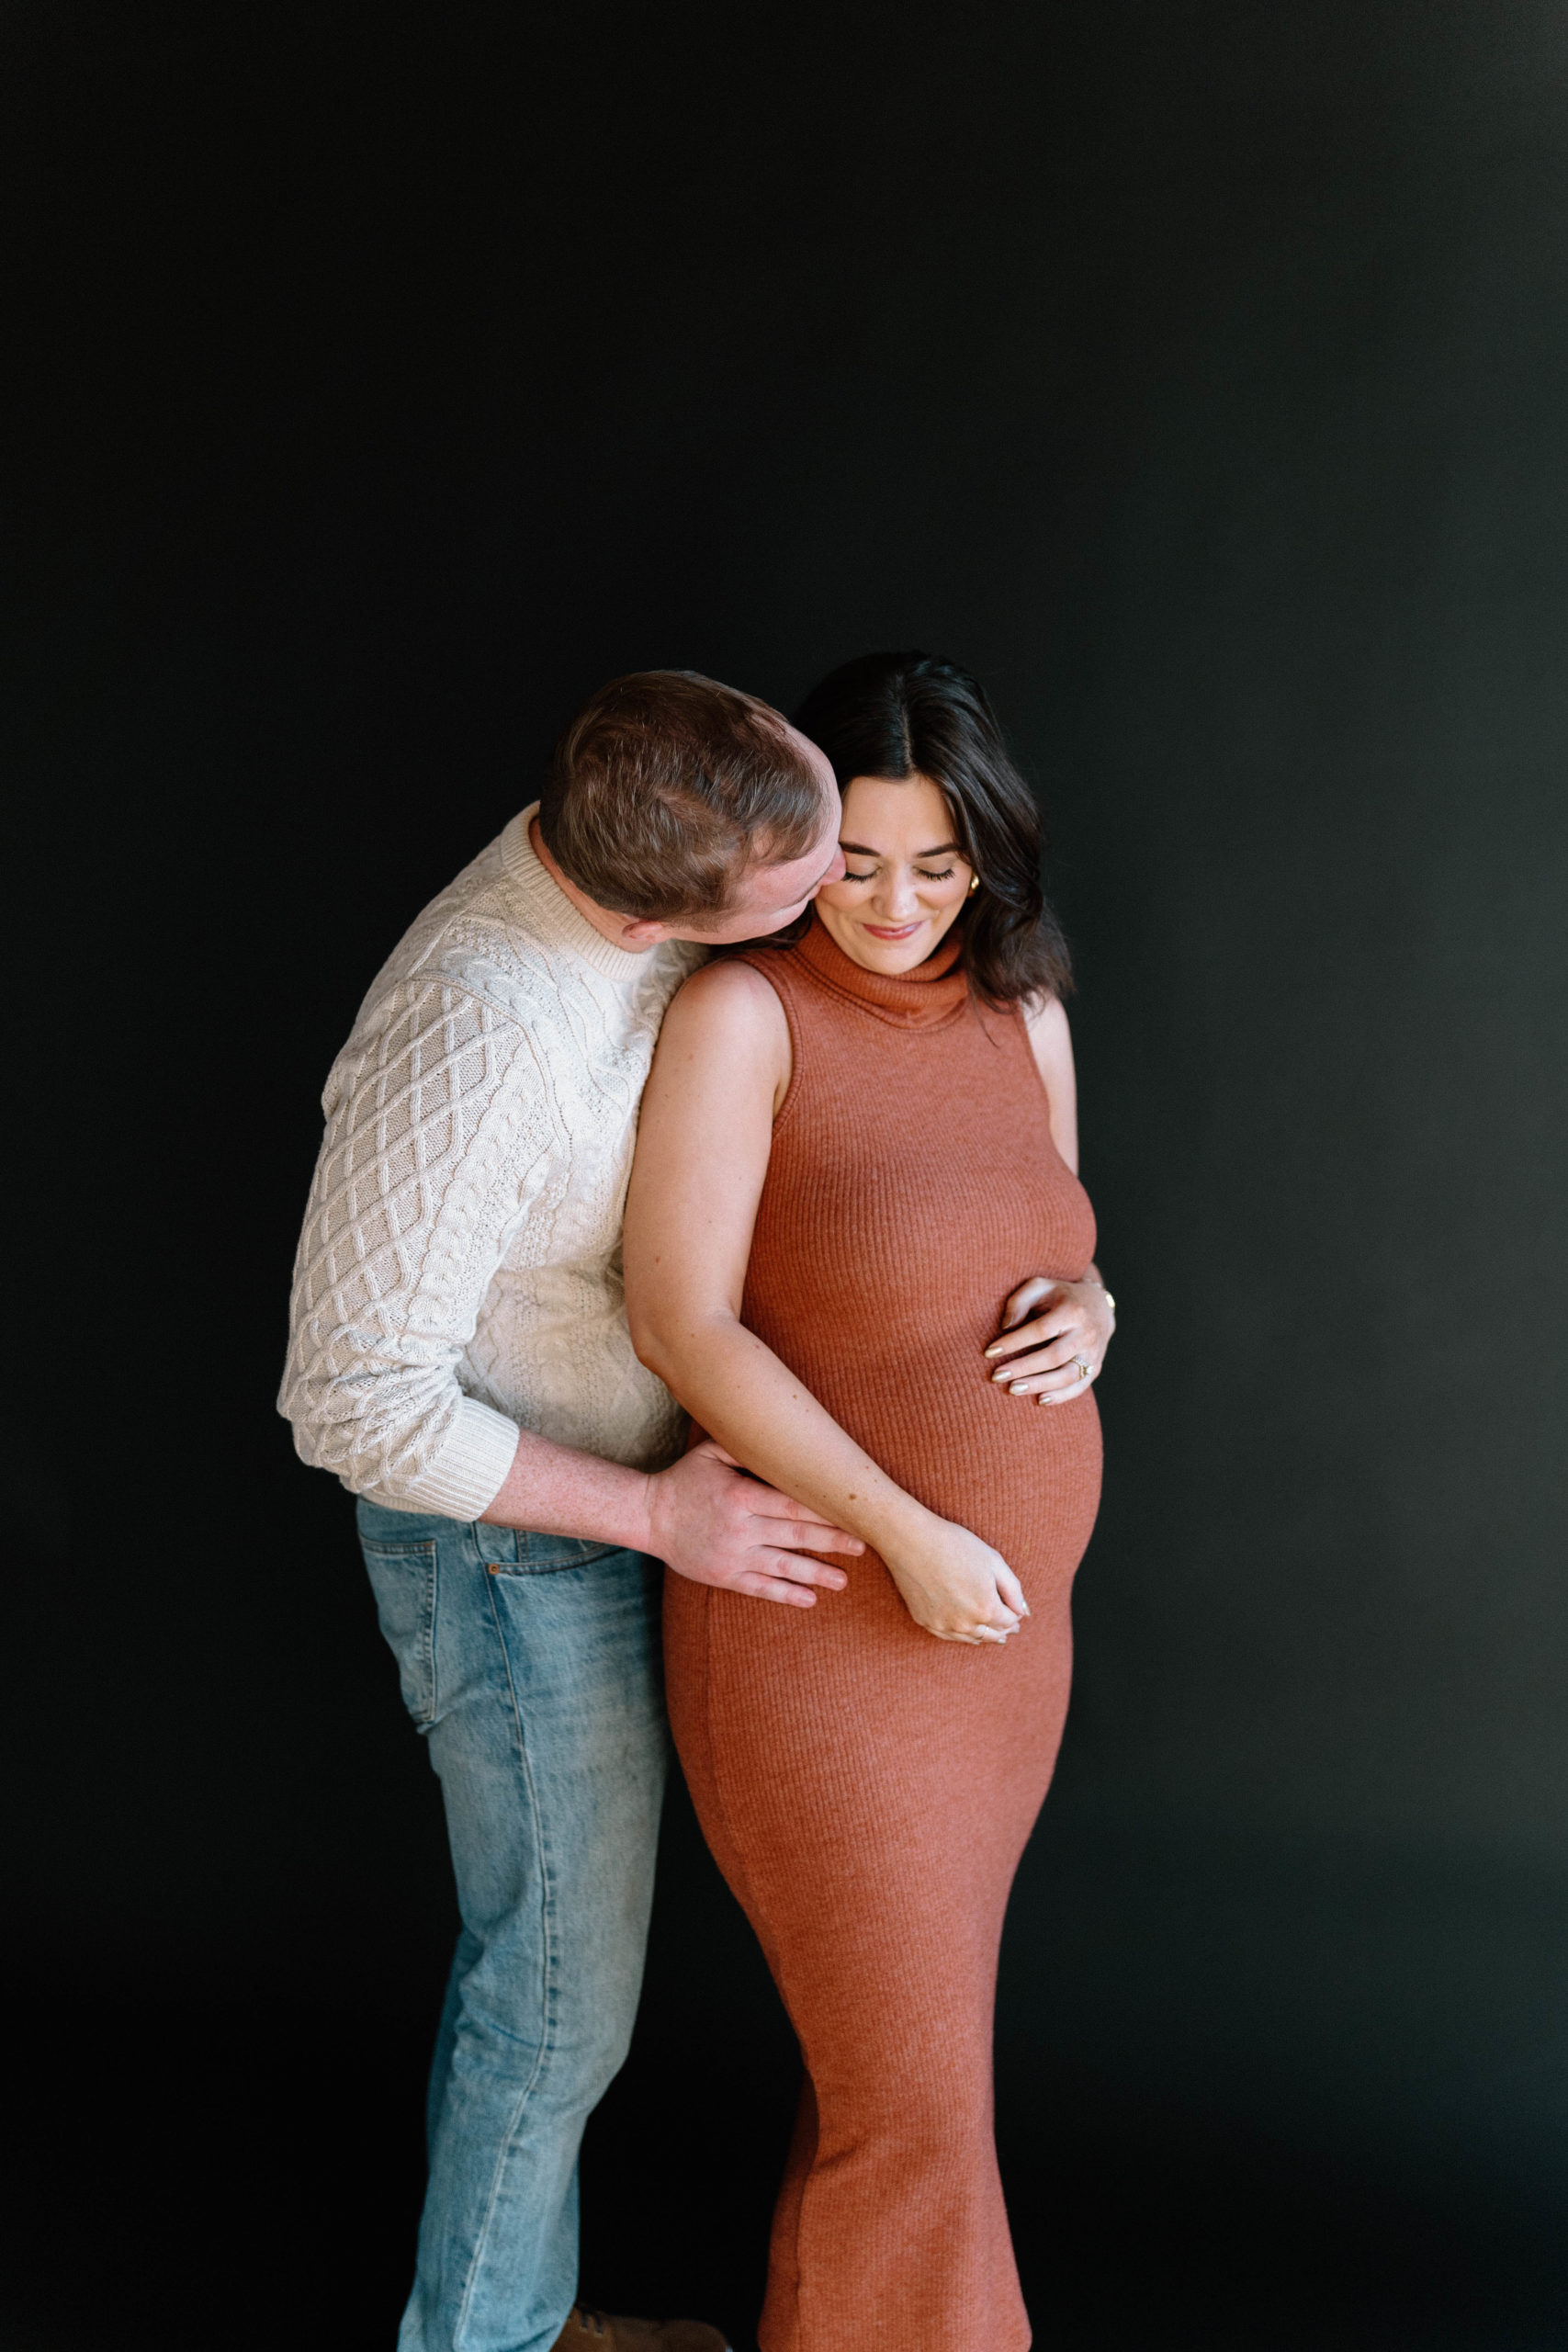 Mom and dad to be studio maternity photos